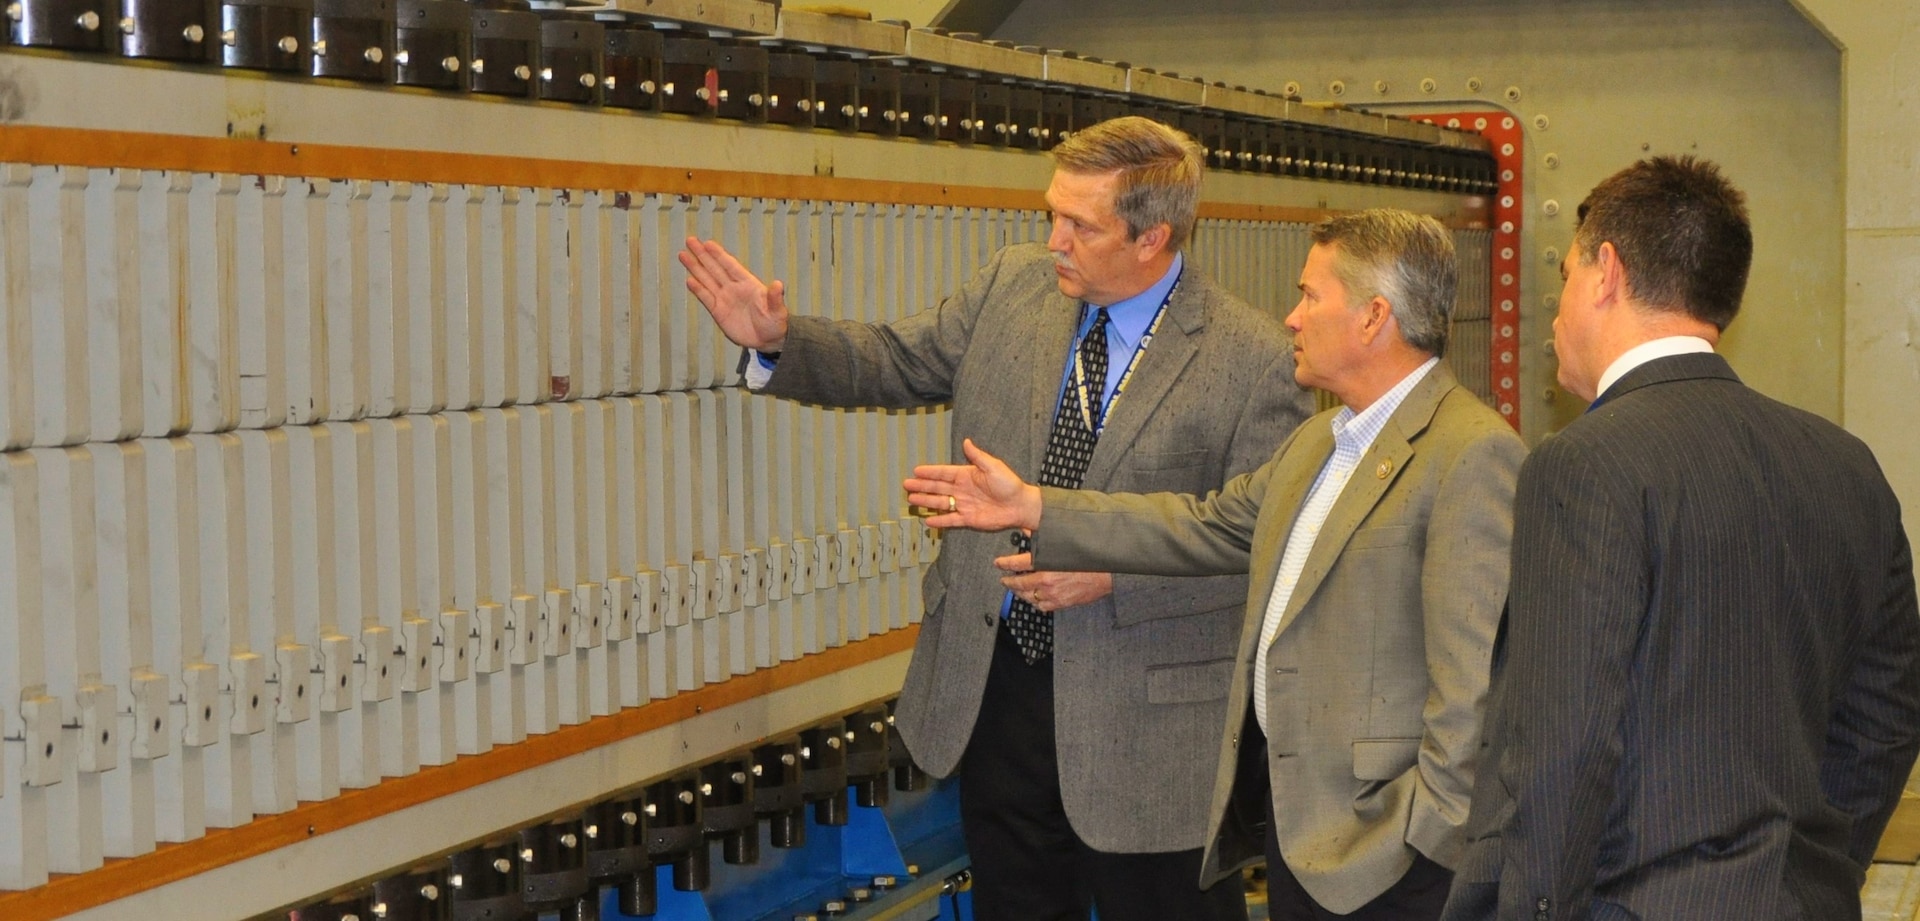 IMAGE: DAHLGREN, Va. (April 24, 2018) - U.S. Rep. Jody Hice, (R-Ga.), center, discusses the laboratory railgun's construction with Chester Petry, electromagnetic railgun lead systems engineer at Naval Surface Warfare Center Dahlgren Division (NSWCDD). Petry described its construction after the congressman witnessed the railgun launcher fire an experimental round at the NSWCDD Potomac River Test Range. Throughout his tour of NSWCDD facilities, Hice - a House Armed Services Committee member - saw the command's capability to develop and integrate complex warfare systems, including the ability to incorporate electric weapons technology into existing and future fighting forces and platforms. Looking on is Dale Sisson, NSWCDD deputy technical director.  (U.S. Navy photo by John Joyce/Released)